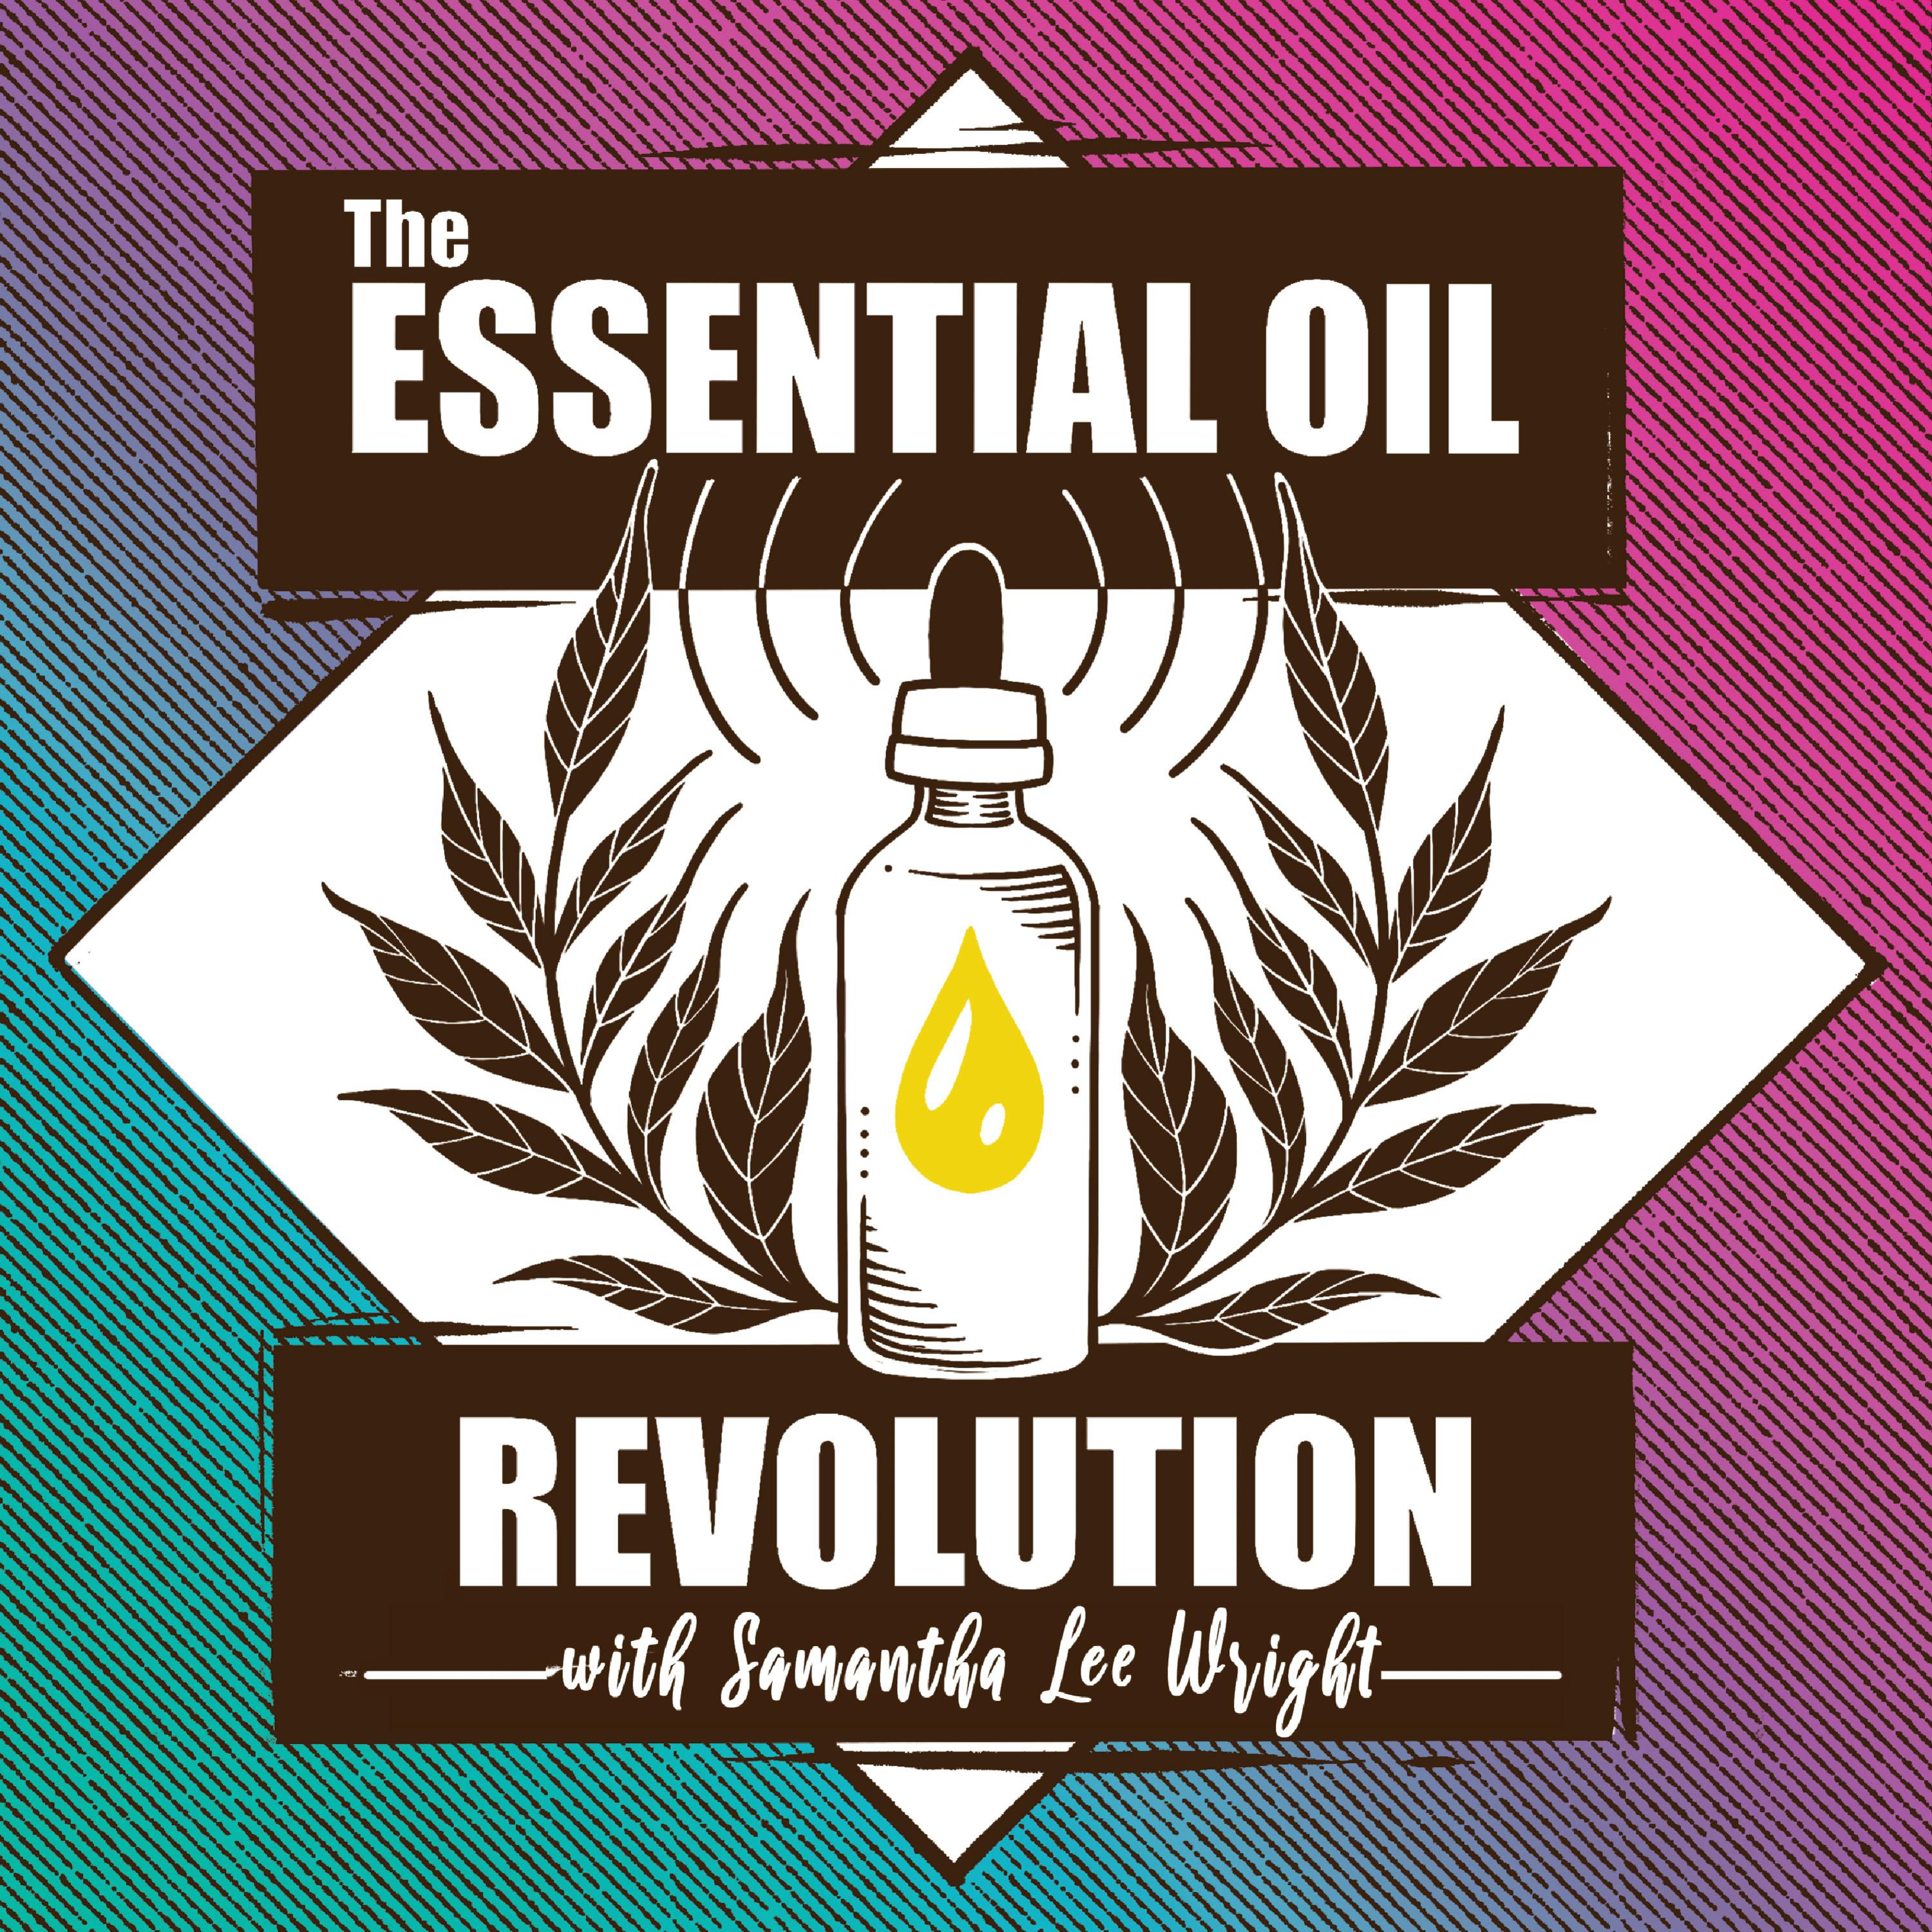 301: Obscure Oils to Try in 2022 w/ Laura Ascher